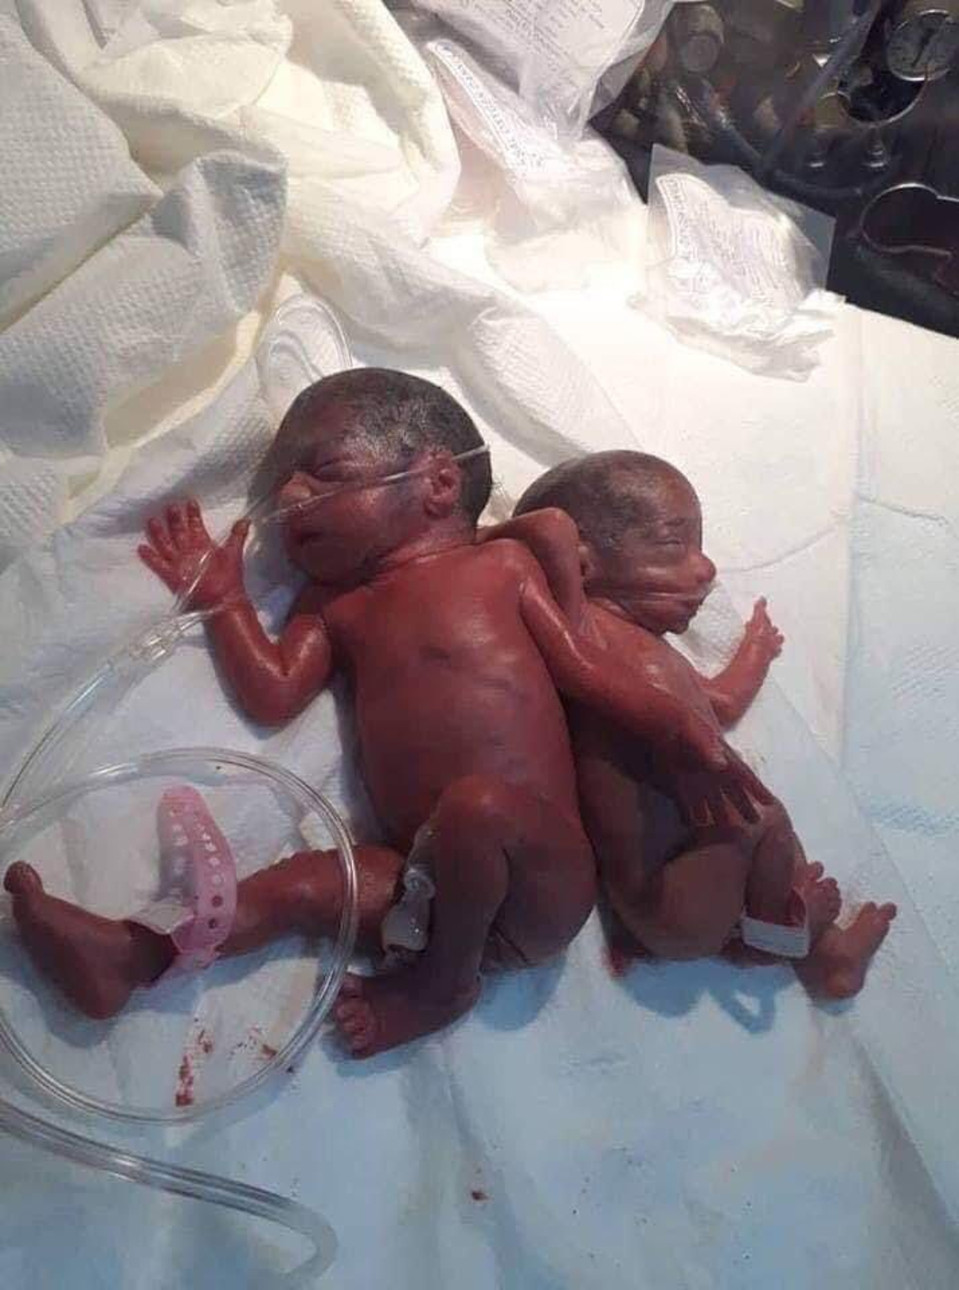 25-Year-Old New Mum Gives Birth 7 Healthy Babies In Single Birth